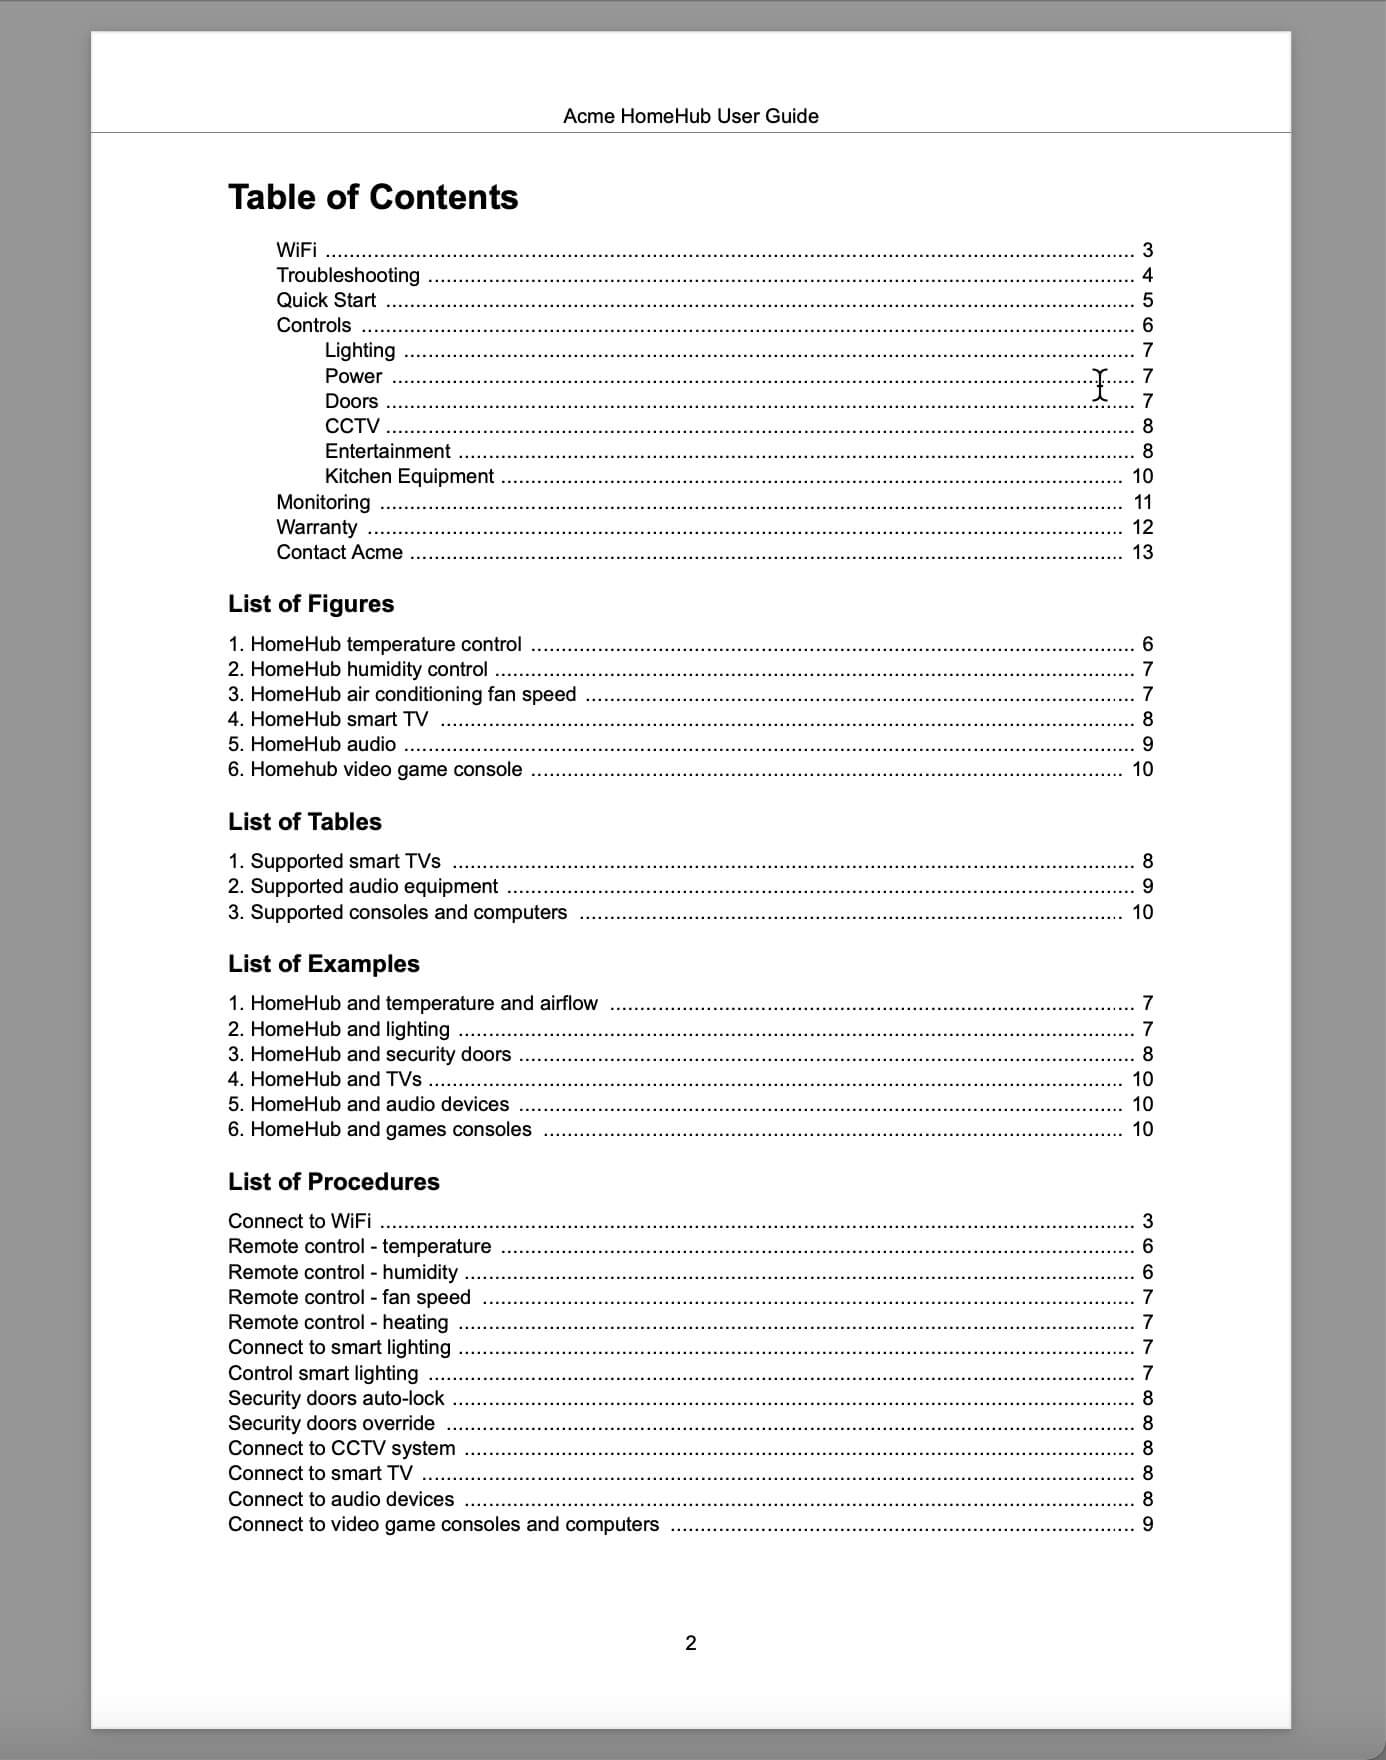 PDF table of contents showing the table of contents followed by a list of figures, list of tables, list of examples, and list of procedures.